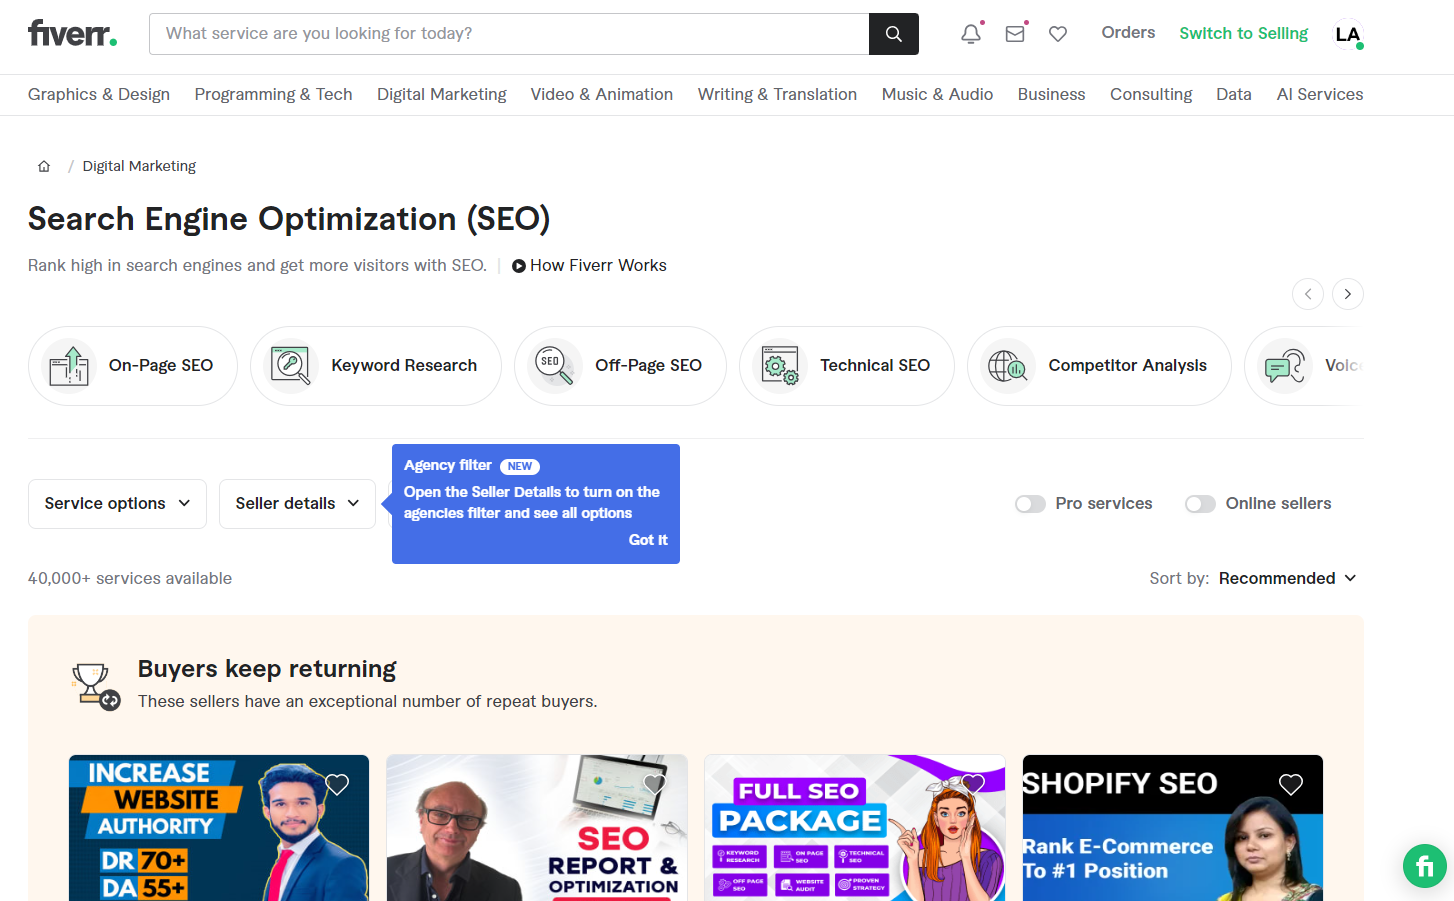 Example of SEO Services in Fiverr